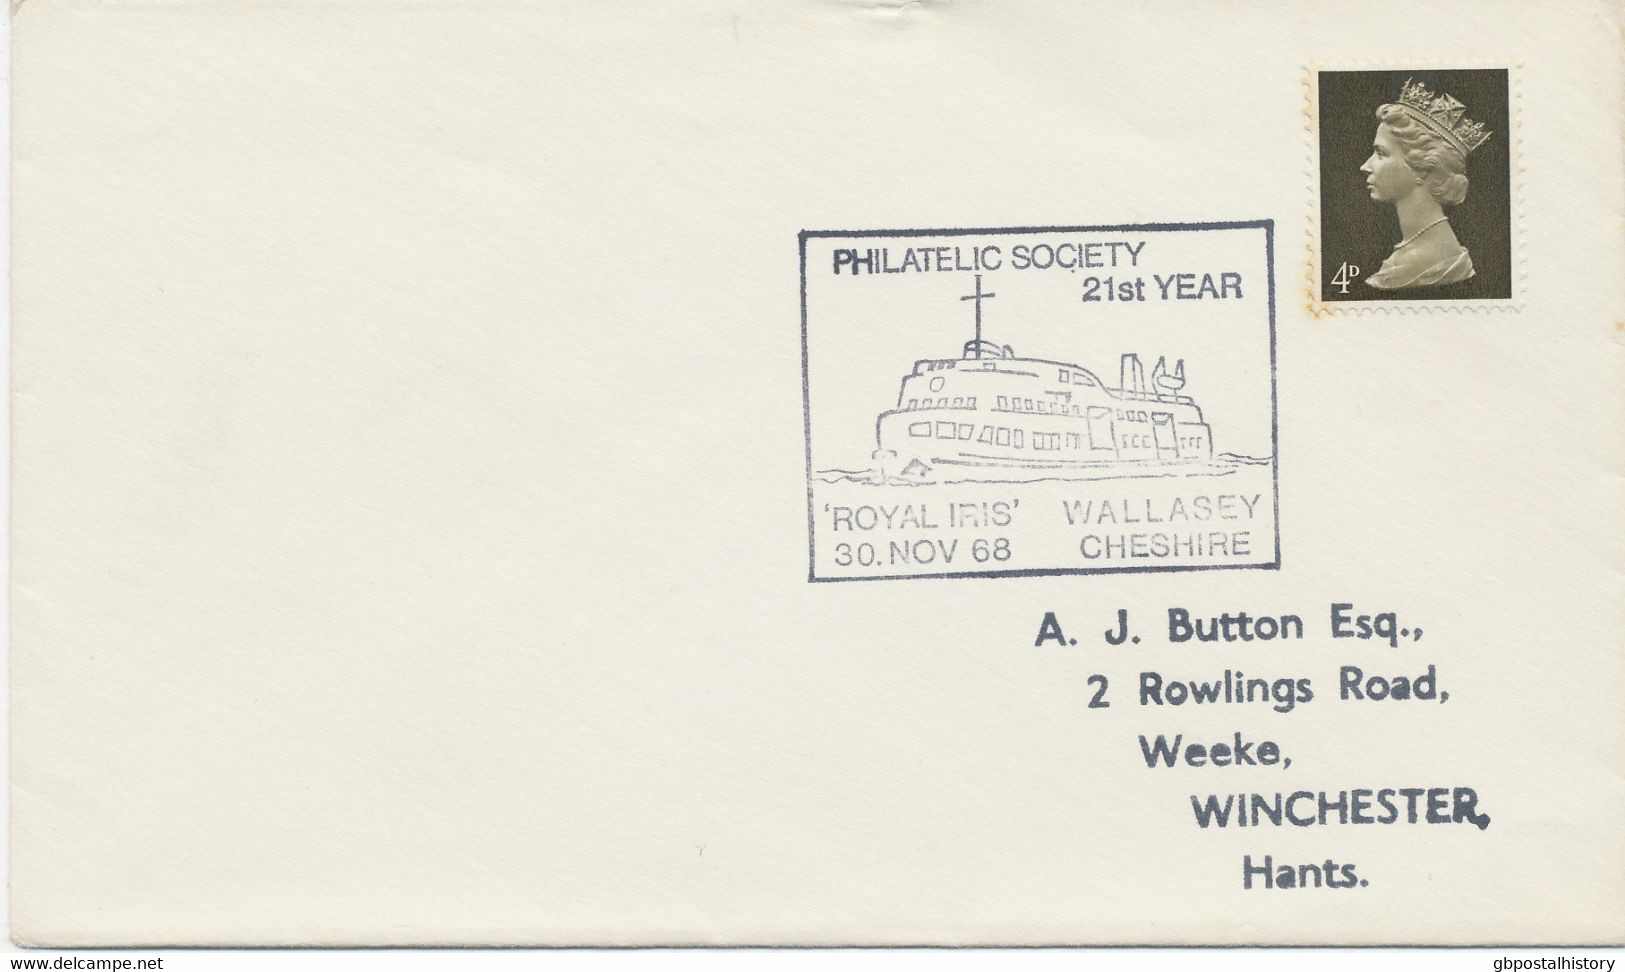 GB SPECIAL EVENT POSTMARKS PHILATELY 1968 Philatelic Society 21st Year 'Royal Iris' Wallasey Cheshire - Covers & Documents